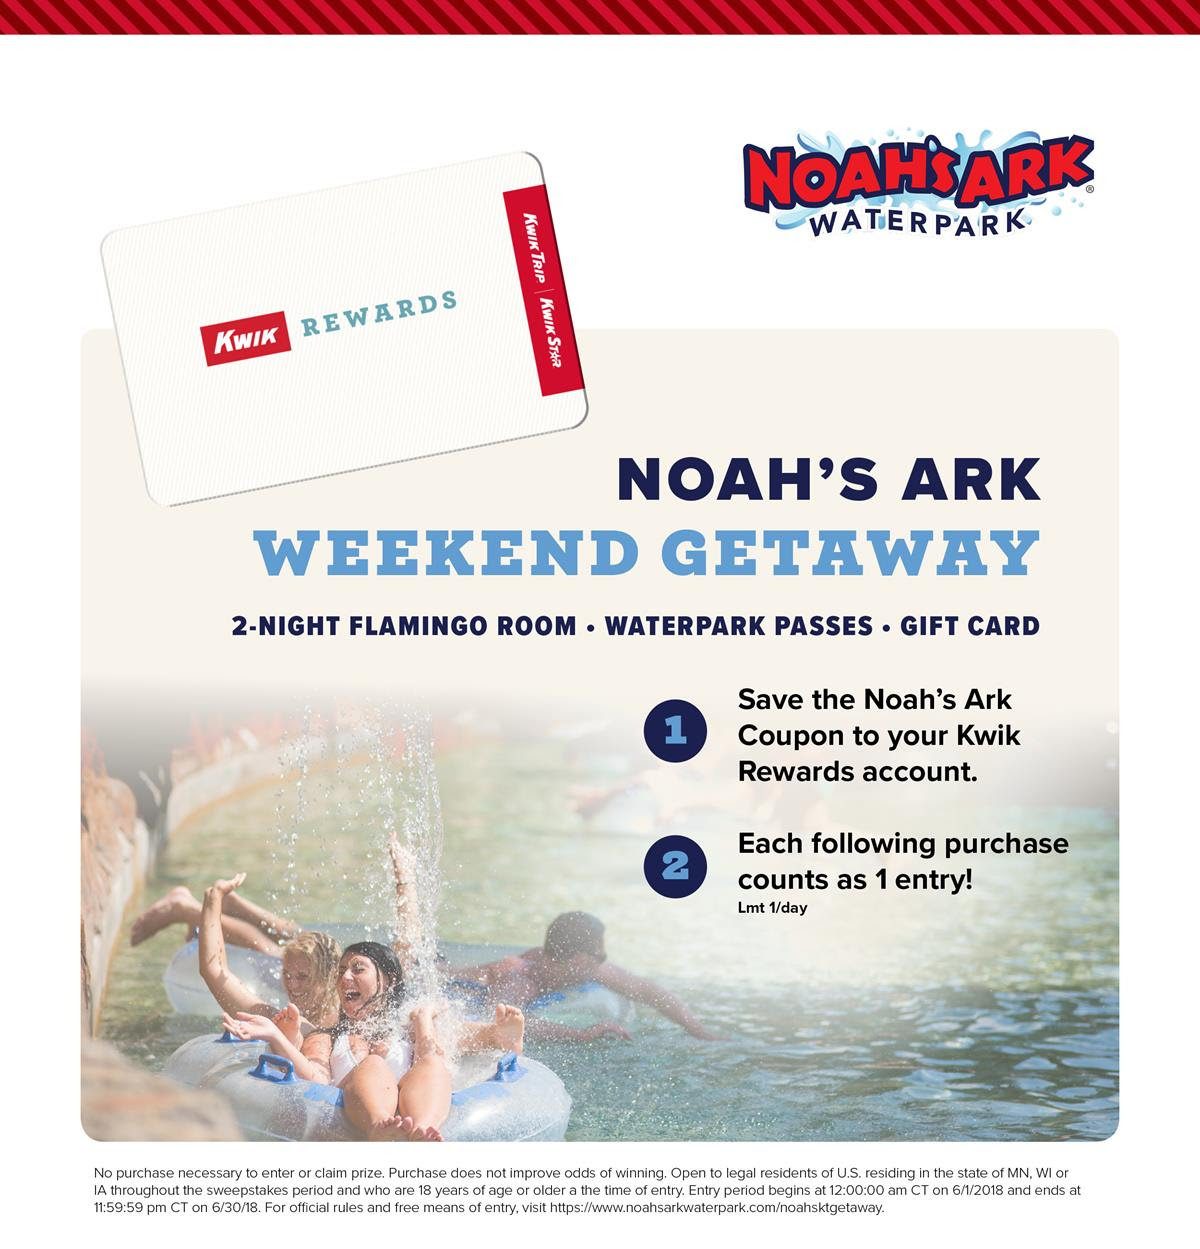 Save the coupon to your account for a chance to win a Noah's Ark Weekend Getaway!